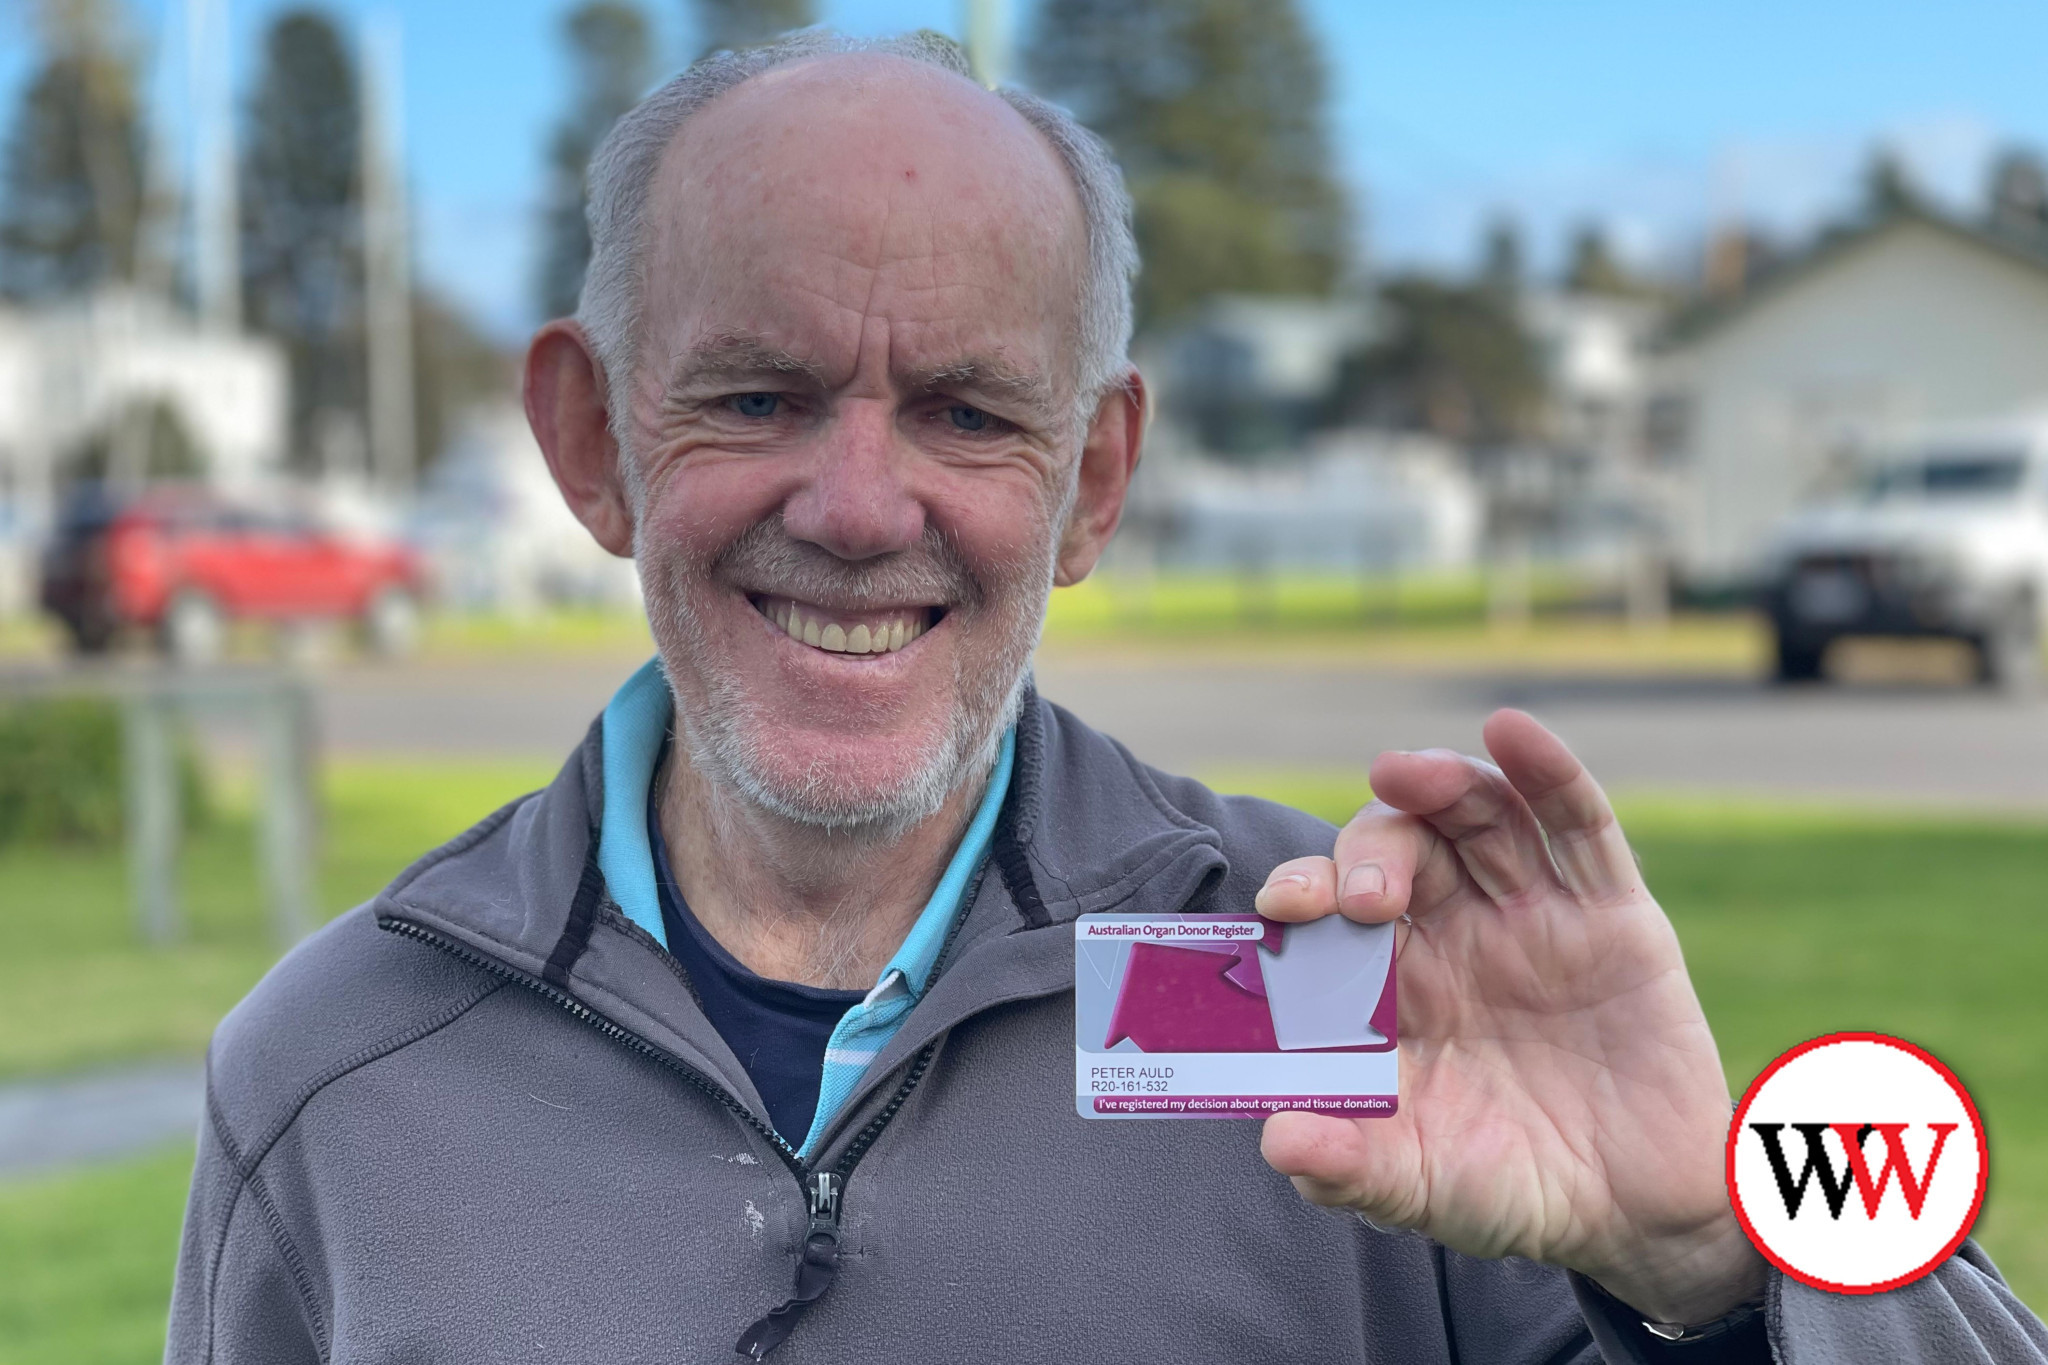 Peter Auld encourages all organ donors to ensure they have a donor registry card and to carry it with them as much as possible.